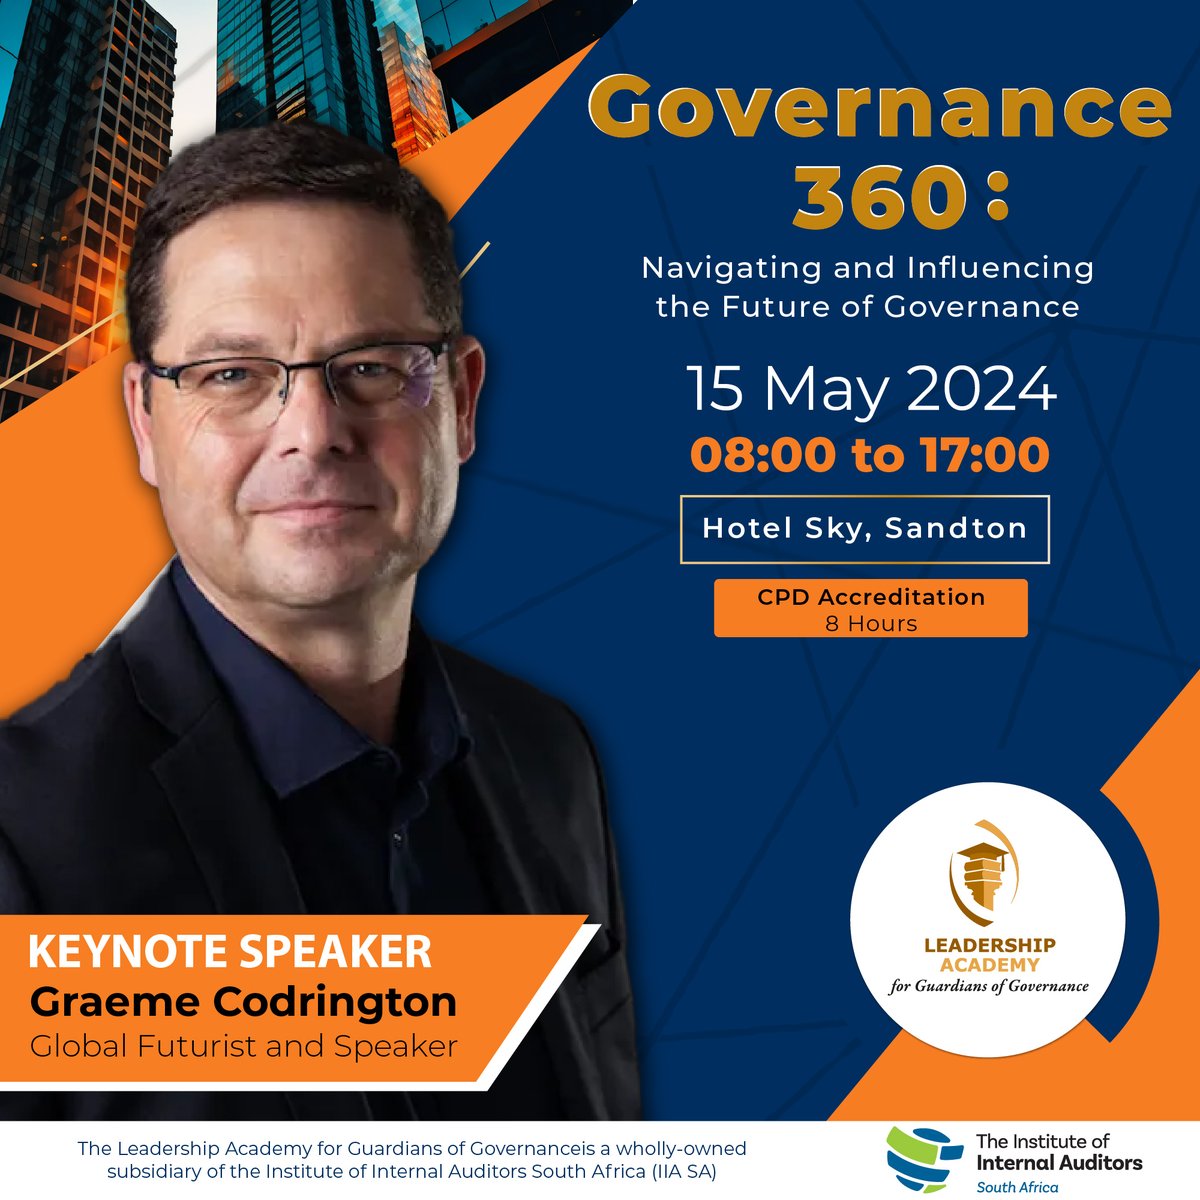 We are excited to announce Graeme Codrington as a keynote speaker at our ‘Governance 360: Navigating and Influencing the Future of Governance’ Conference! Don't miss his session on 15 May. Register: evolve.eventoptions.co.za/register/gover… @FuturistGraeme @TomorrowTodayGlobal #Governance360